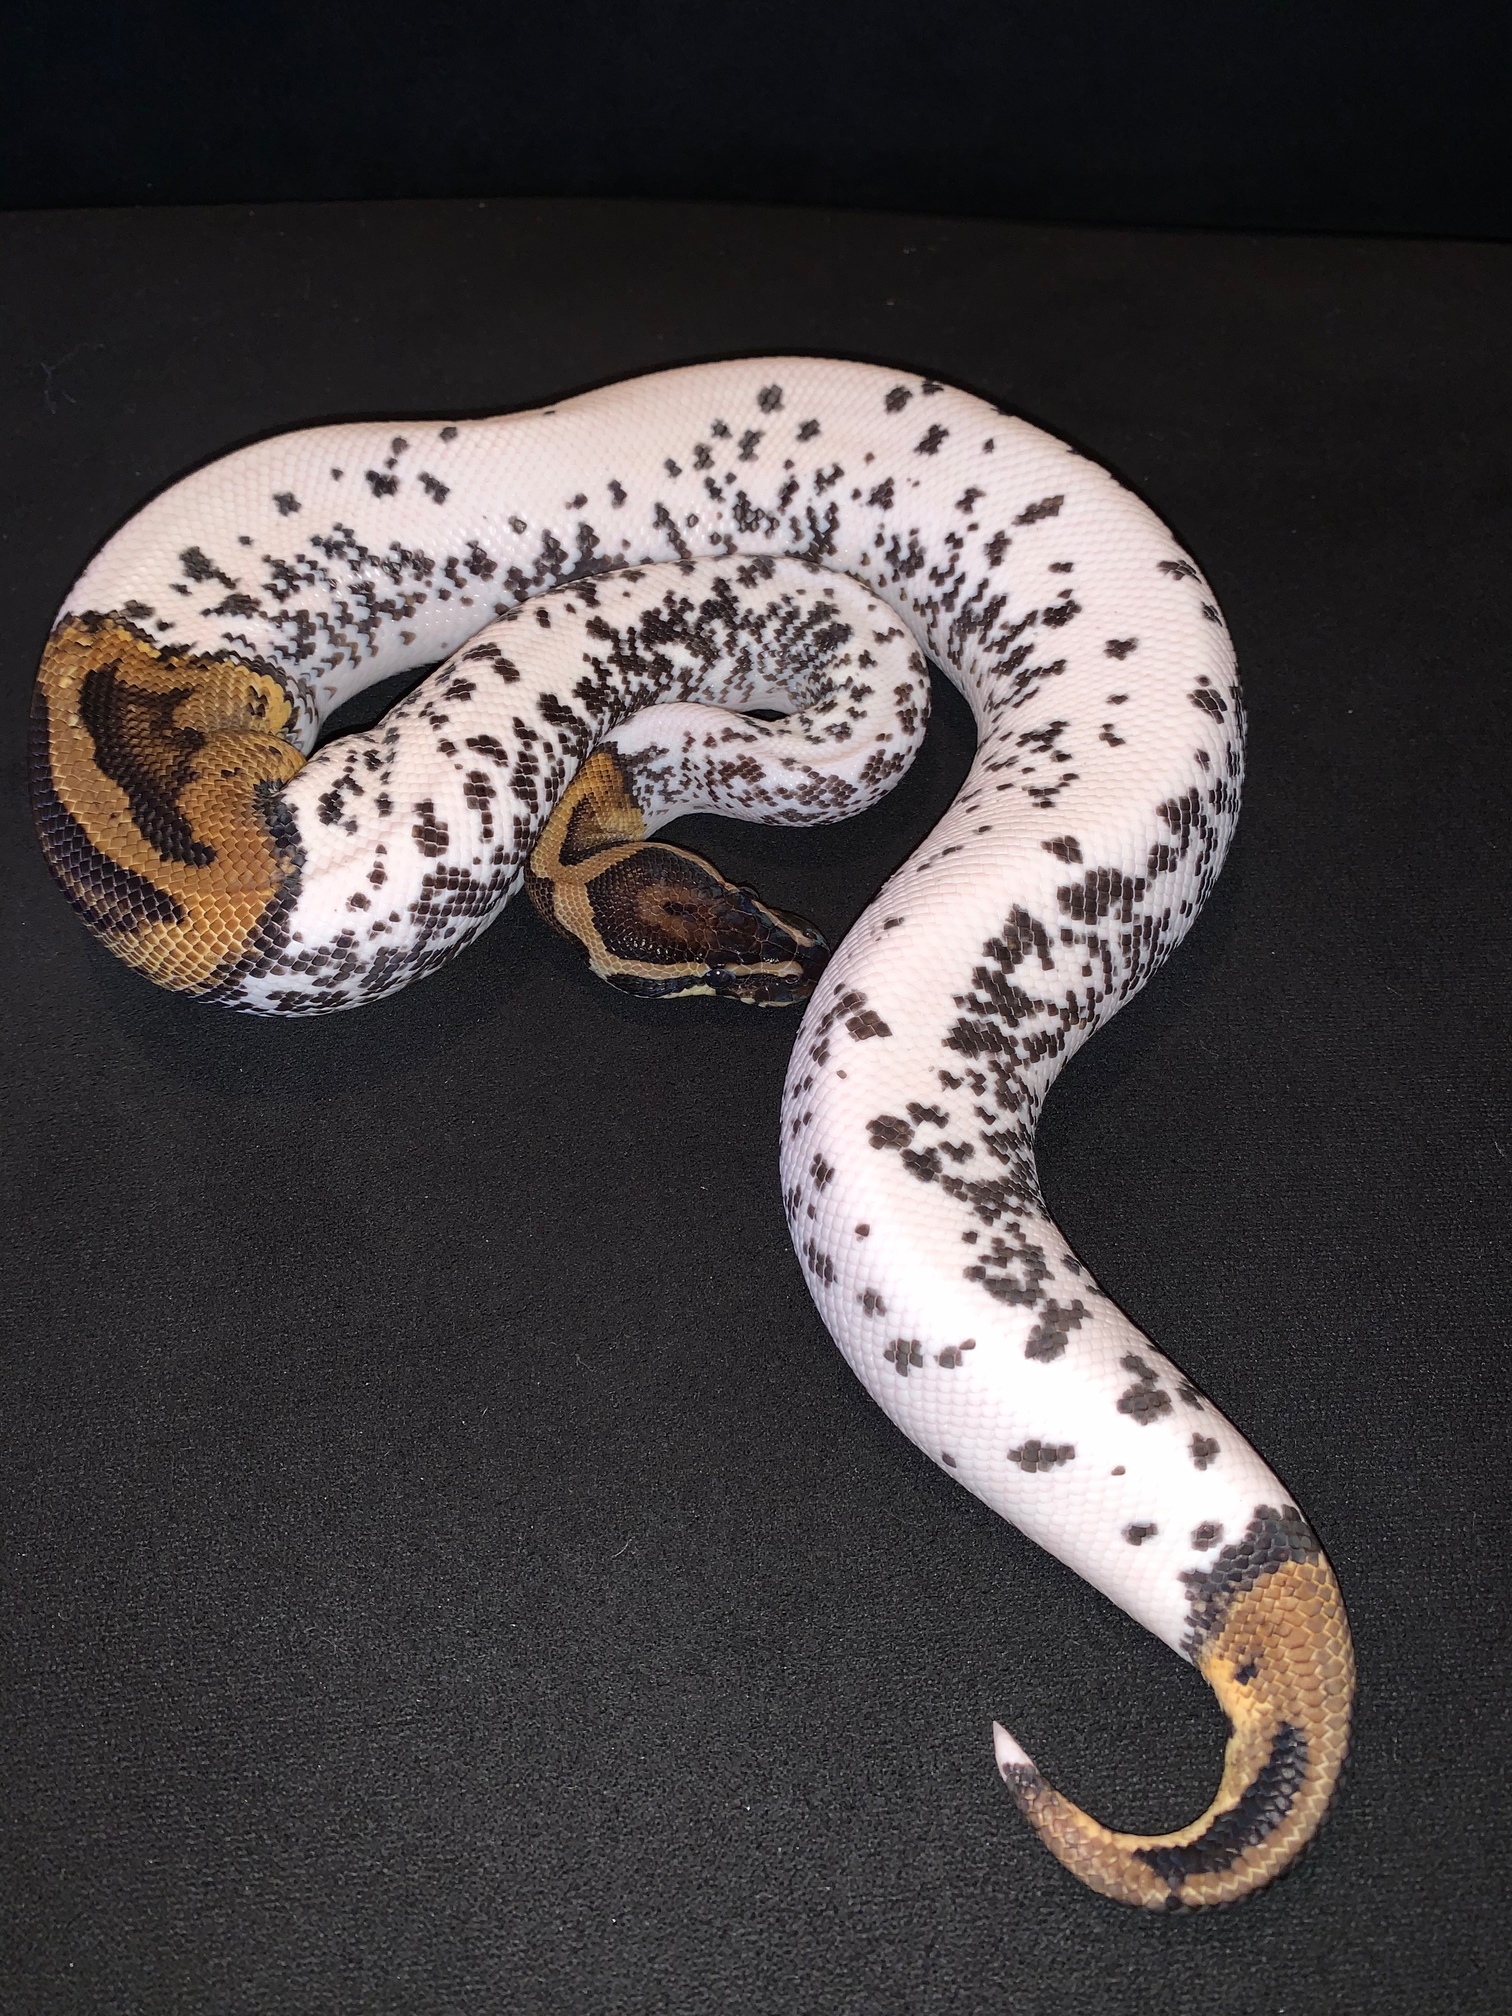 The freckles never end! - Ball Pythons - MorphMarket Reptile Community